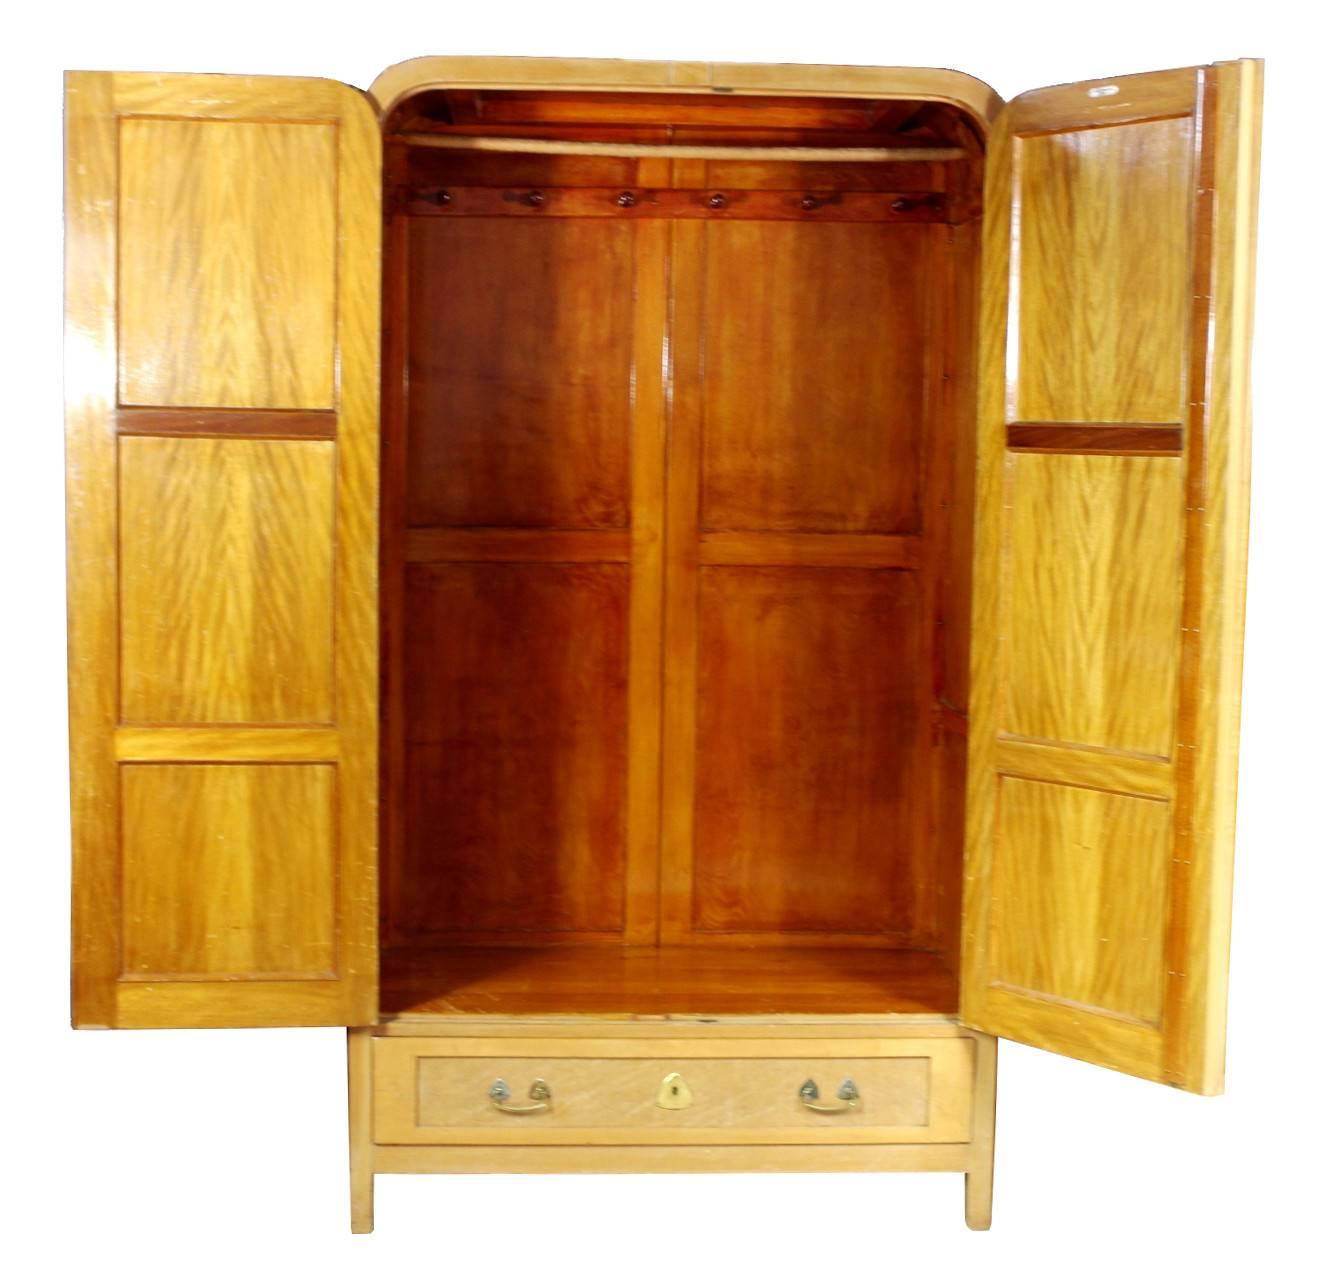 Pair of Thonet wardrobes made in the early 20th century. Both pieces are rarely labeled 'Bratří Thonetové Brno' and have Thonet embossed on the keys. They are made from bent beech plywood and are in original condition. 
Price for one piece.